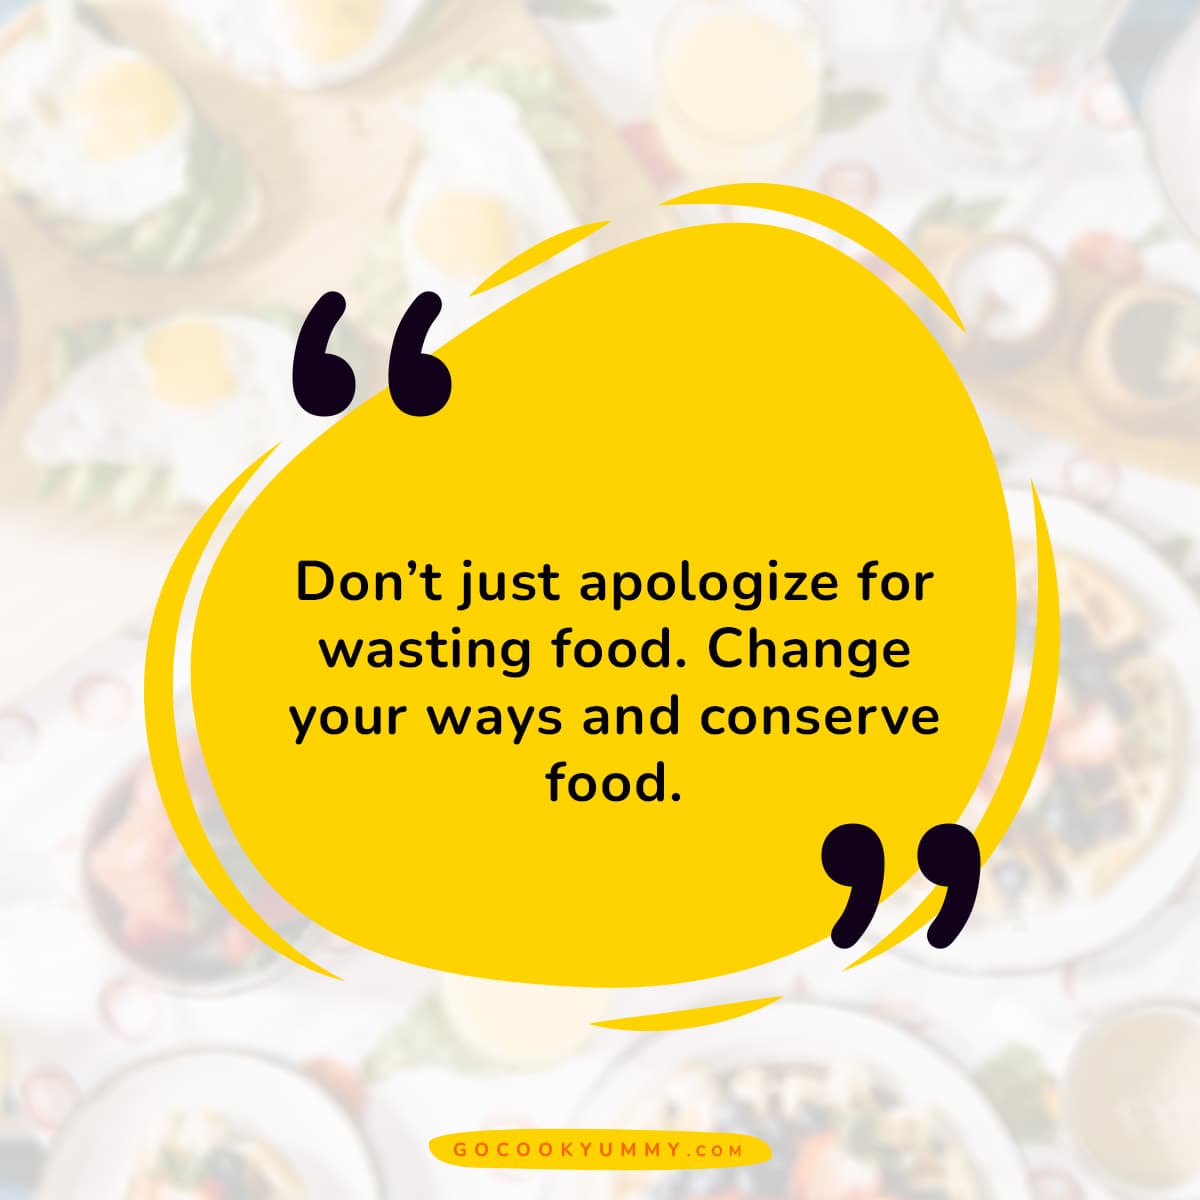 Don't just apologize for wasting food. Change your ways and conserve food.